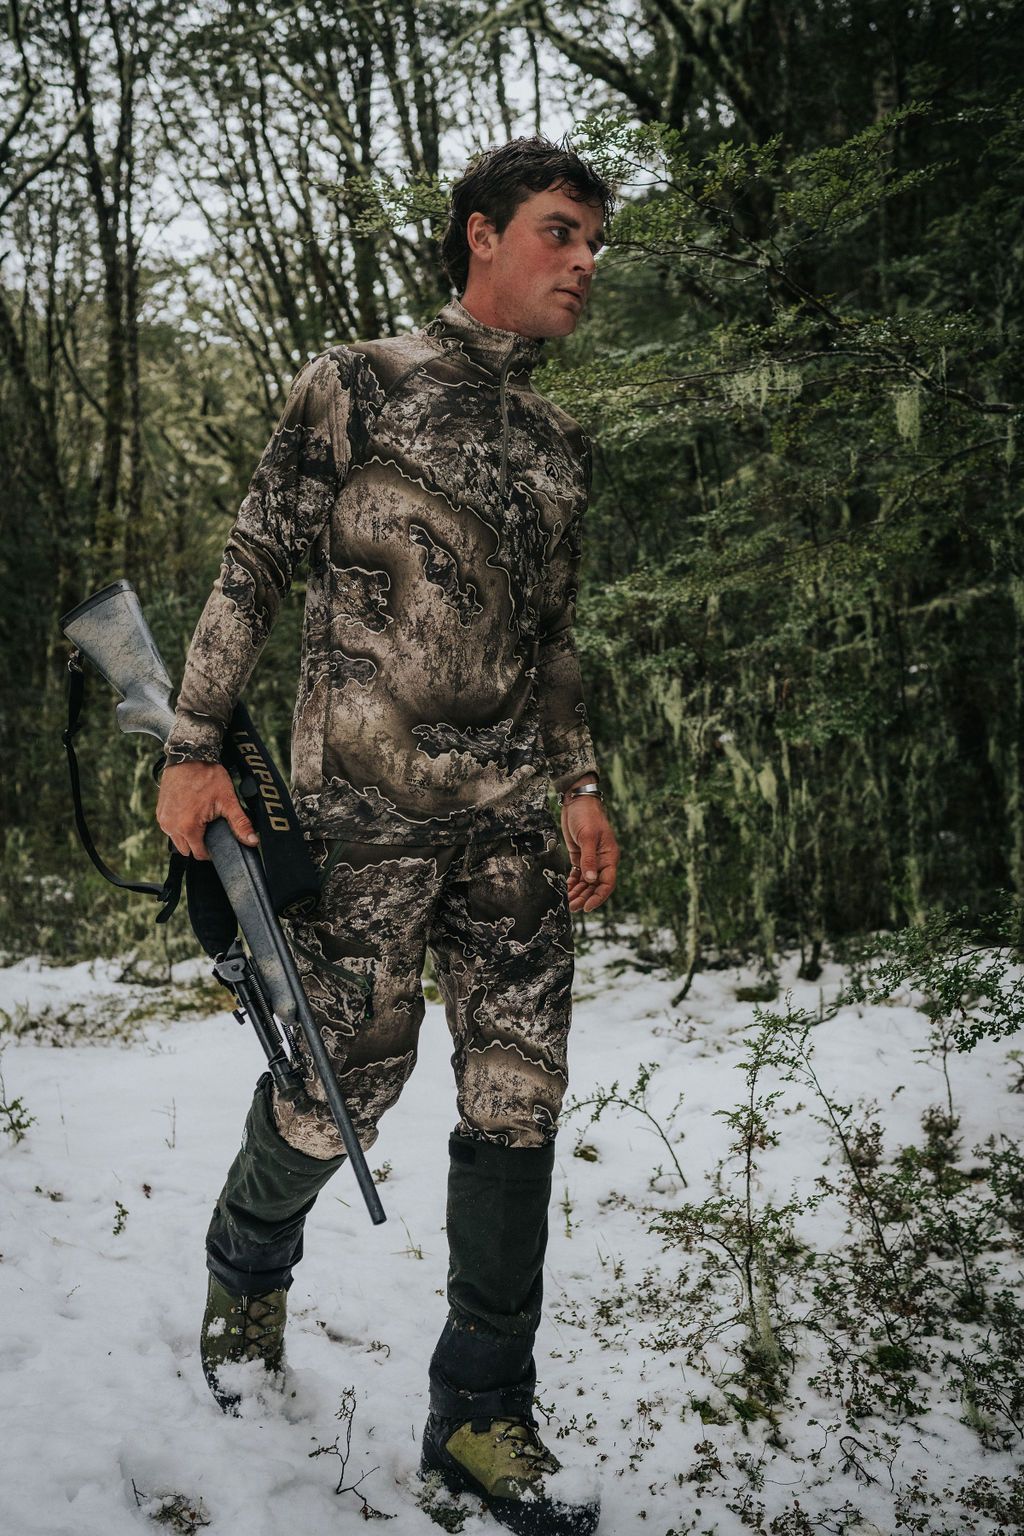 Ridgeline Mens Performance QTR Zip Top - Excape Camo -  - Mansfield Hunting & Fishing - Products to prepare for Corona Virus